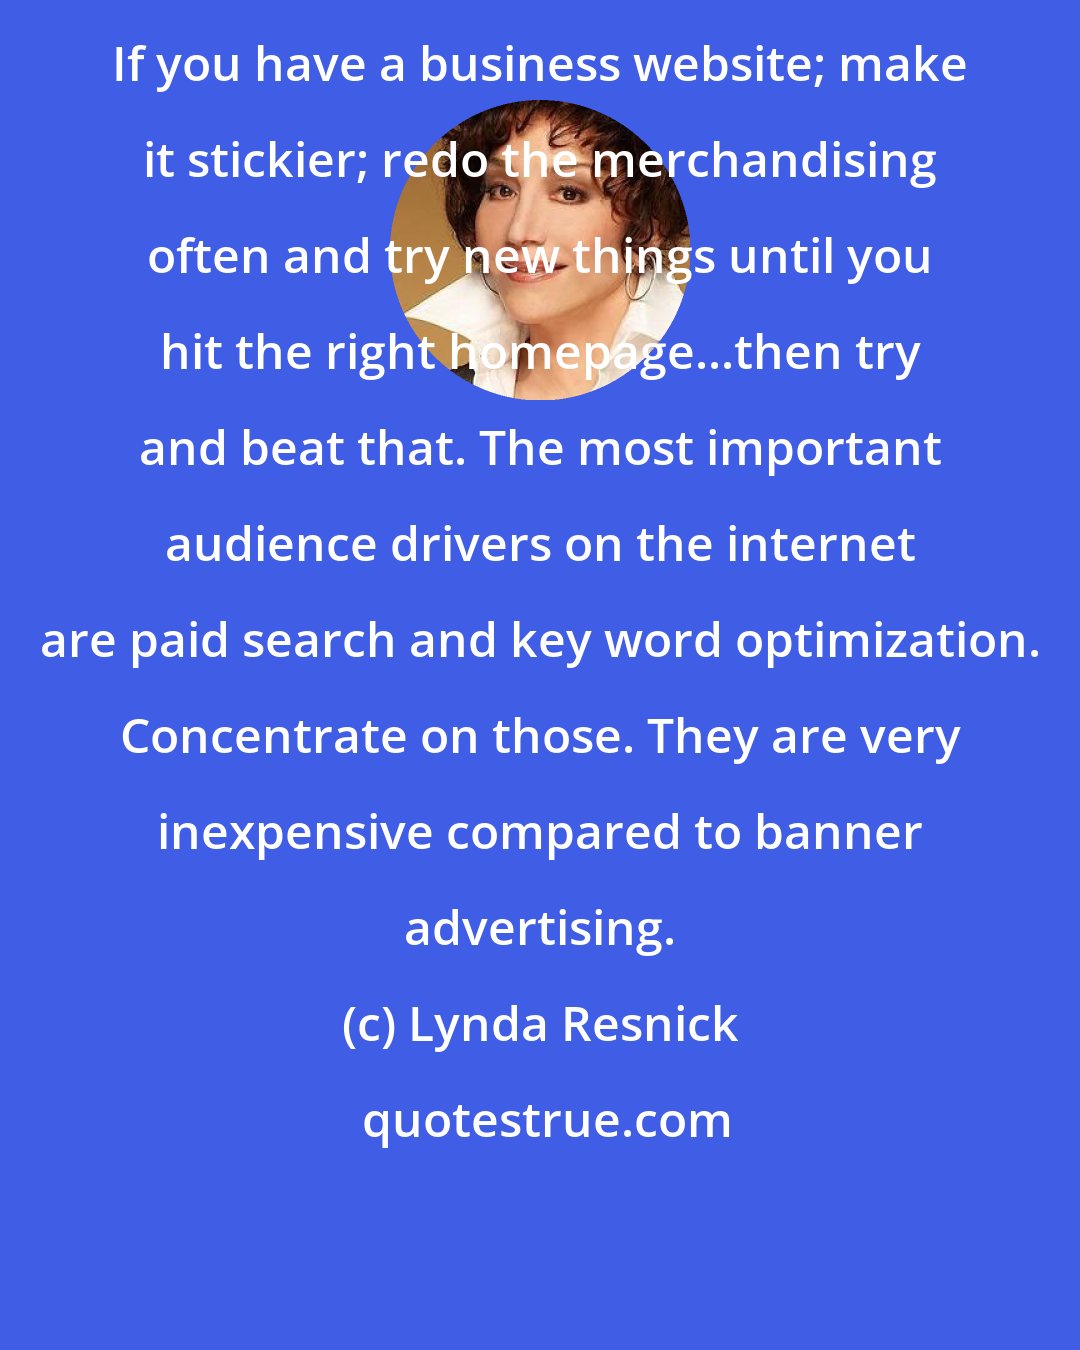 Lynda Resnick: If you have a business website; make it stickier; redo the merchandising often and try new things until you hit the right homepage...then try and beat that. The most important audience drivers on the internet are paid search and key word optimization. Concentrate on those. They are very inexpensive compared to banner advertising.